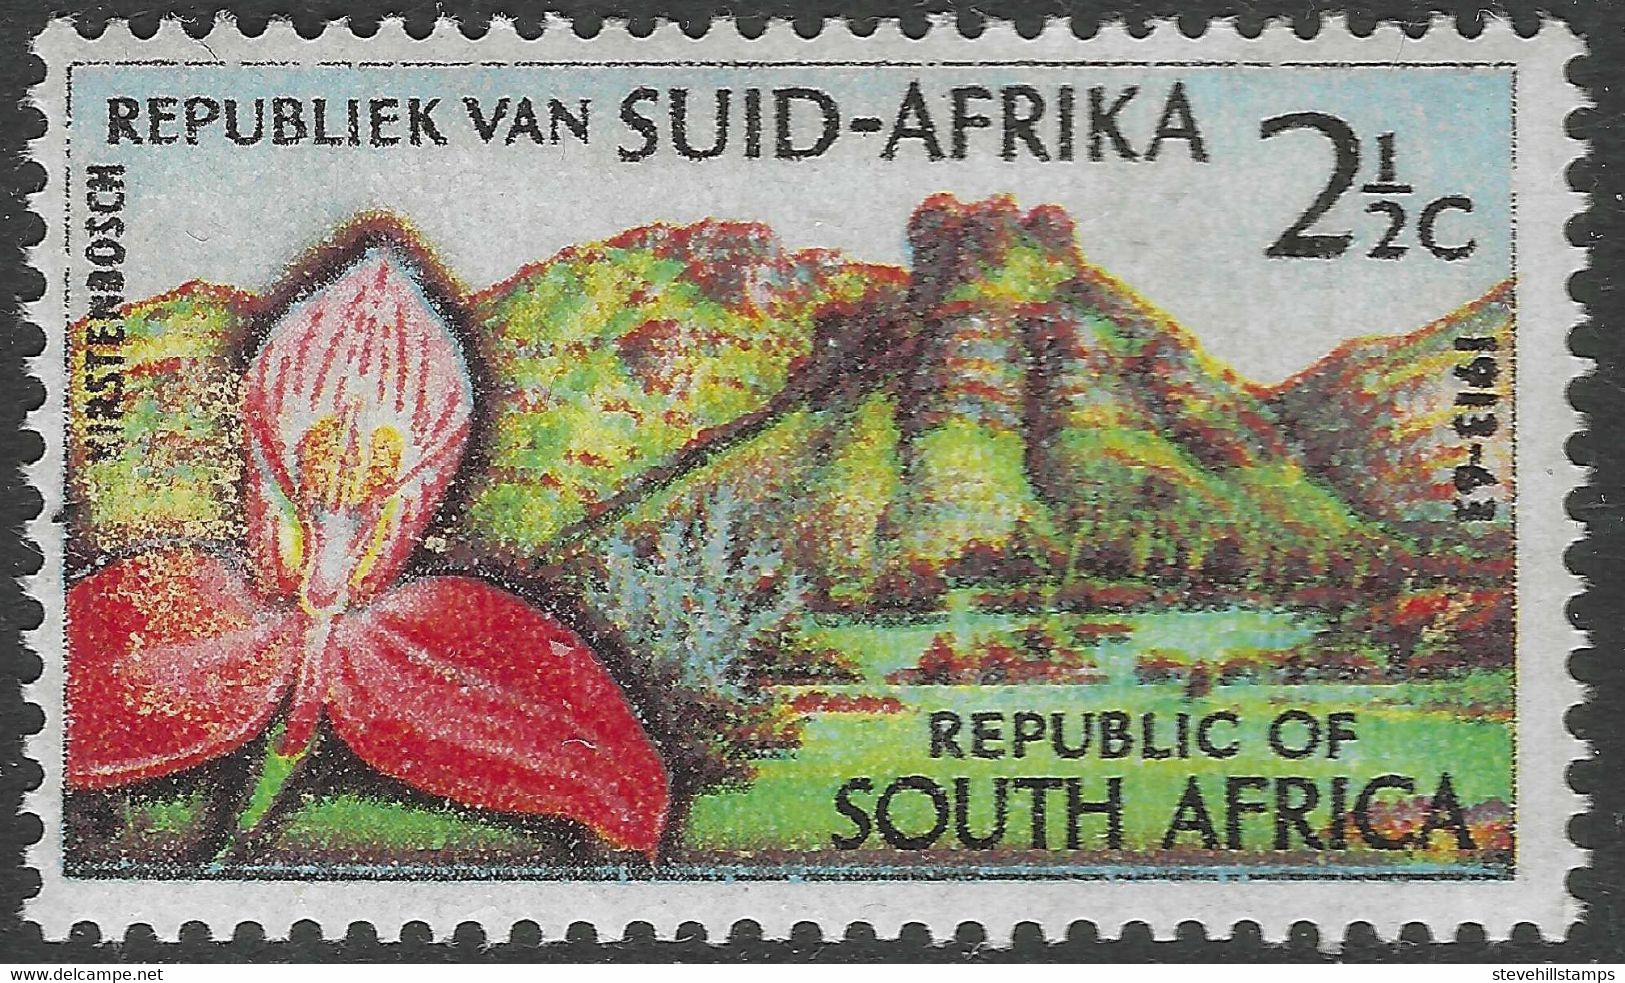 South Africa. 1963 50th Anniv. Of Kirstenbosch Botanic Gardens, Cape Town. 2½c MH SG 224 - Unused Stamps